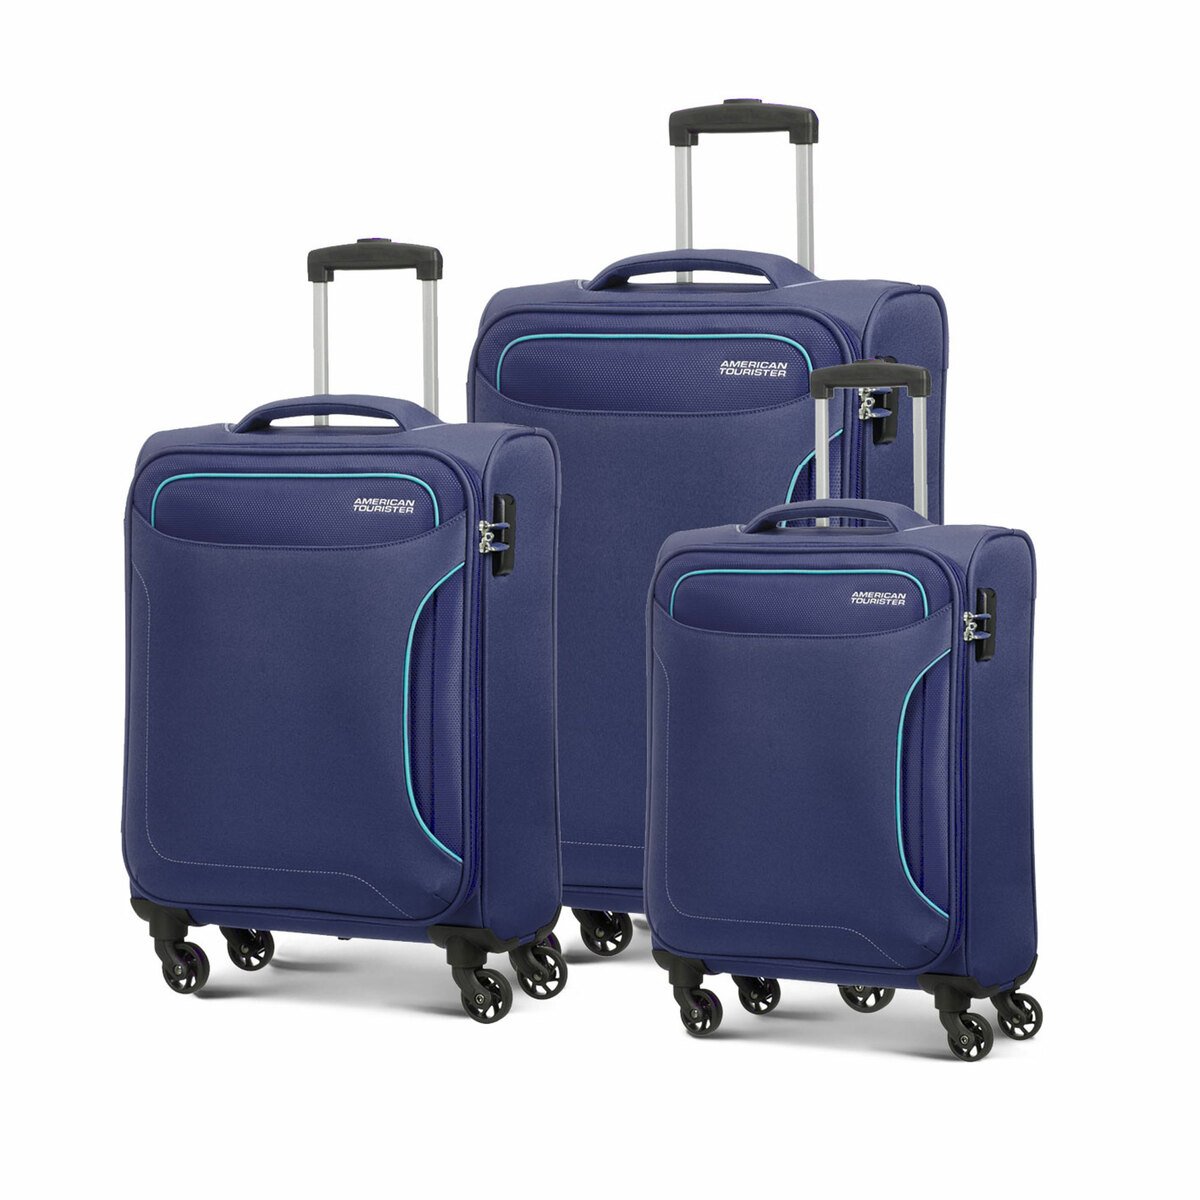 American Tourister Holiday 4Wheel Soft Trolley 3 Pieces Set (55cm+68cm+80cm) Navy Blue Color